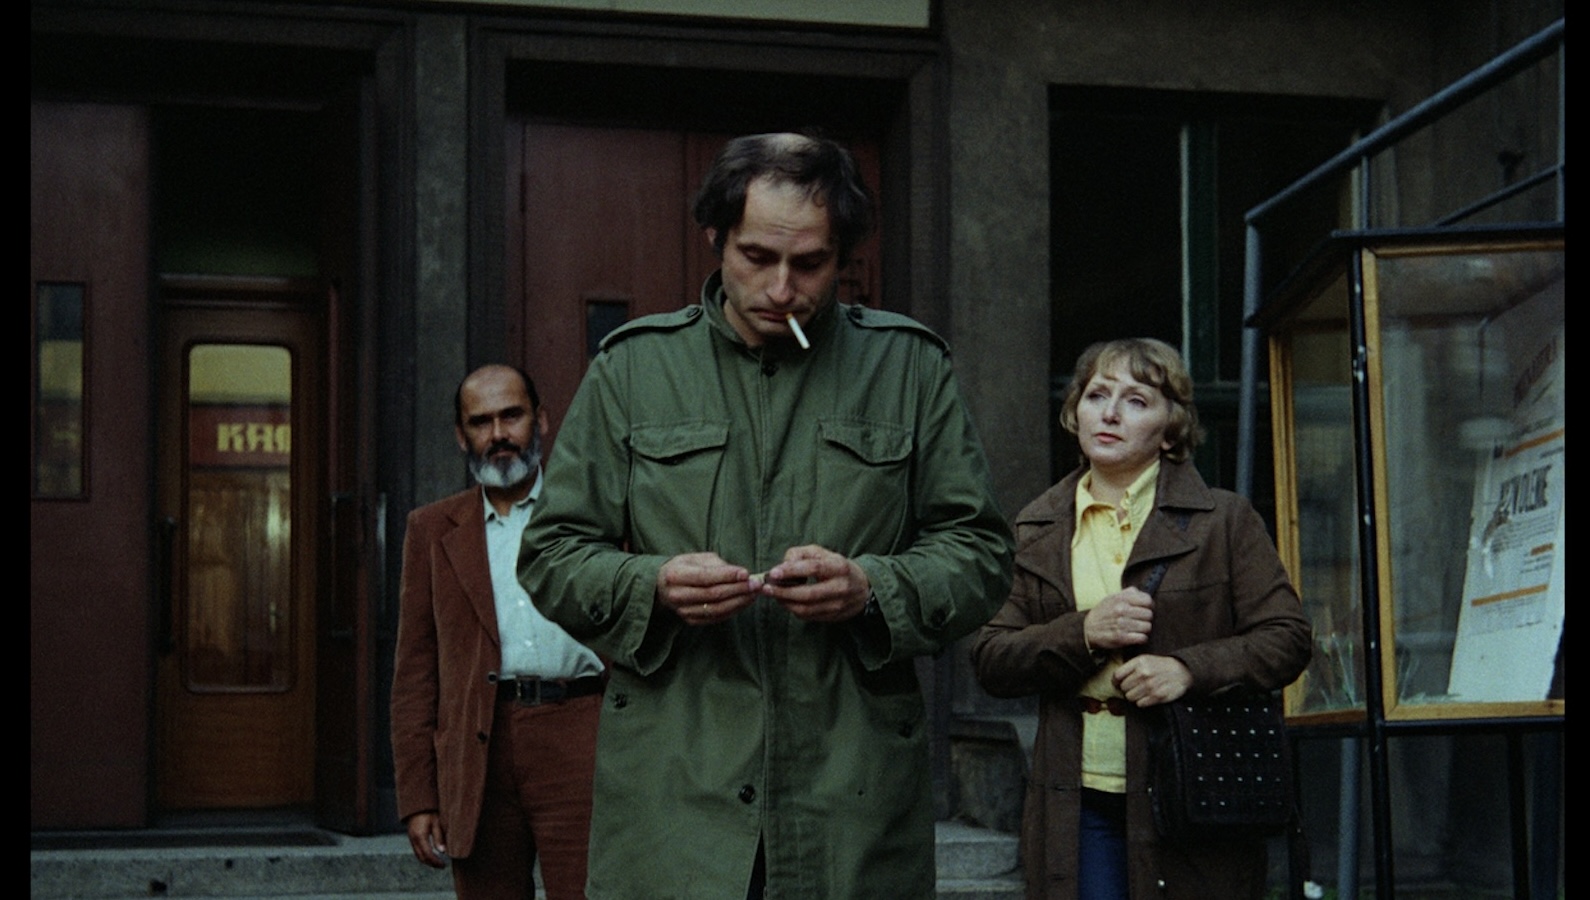 A man in green fatigues lights is about to light a cigarette dangling from his mouth, while a man and woman walk behind him, looking expectantly at him